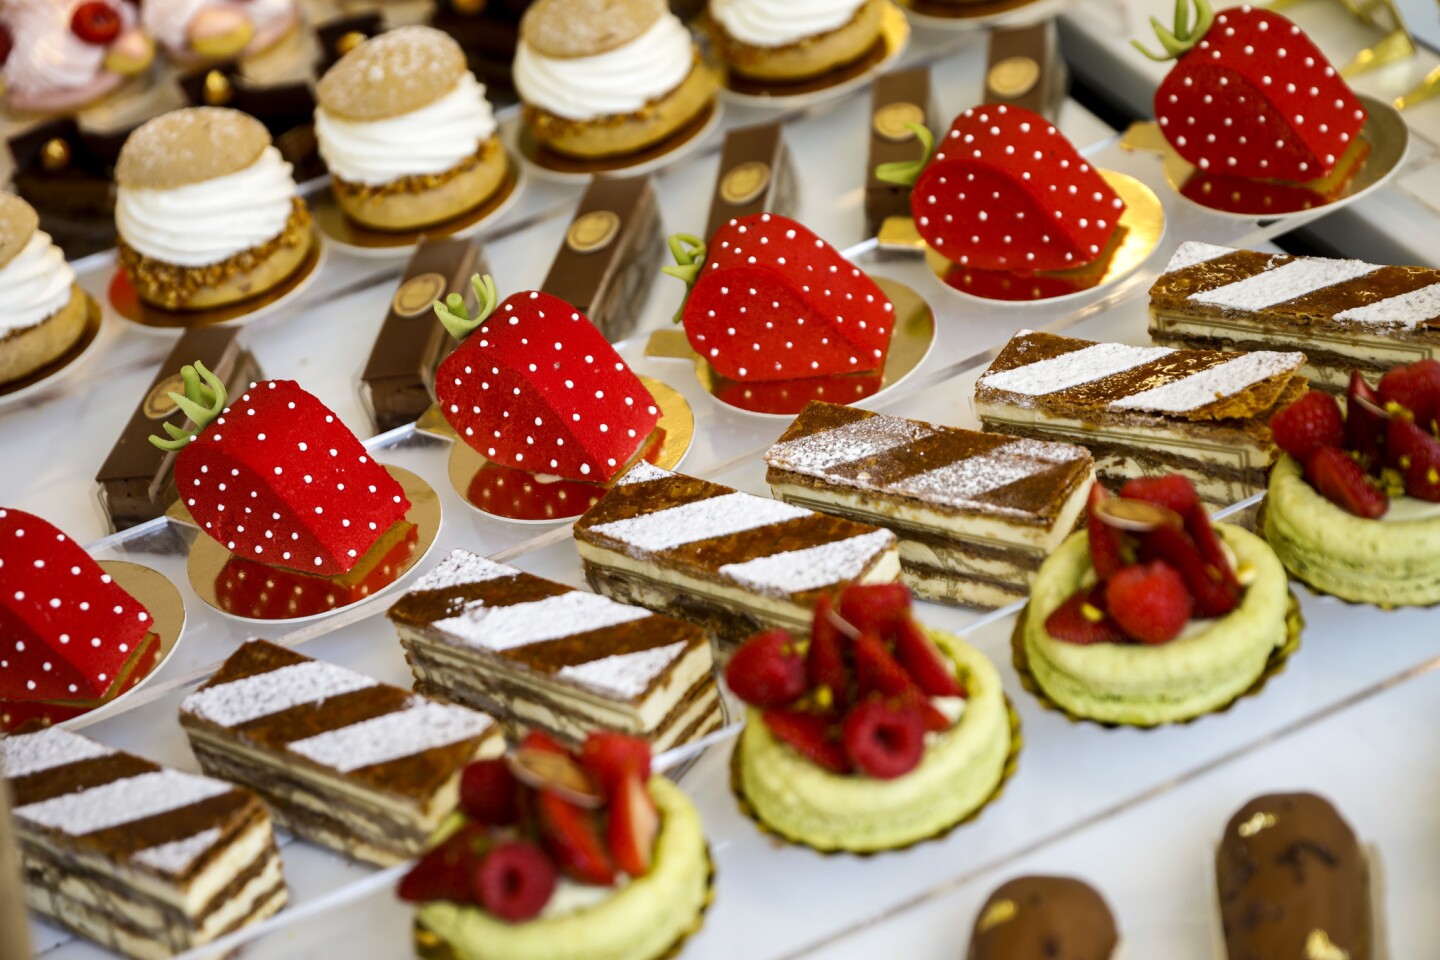 A selection of sweet treats at the French boutique and restaurant Ladurée in the Grove.